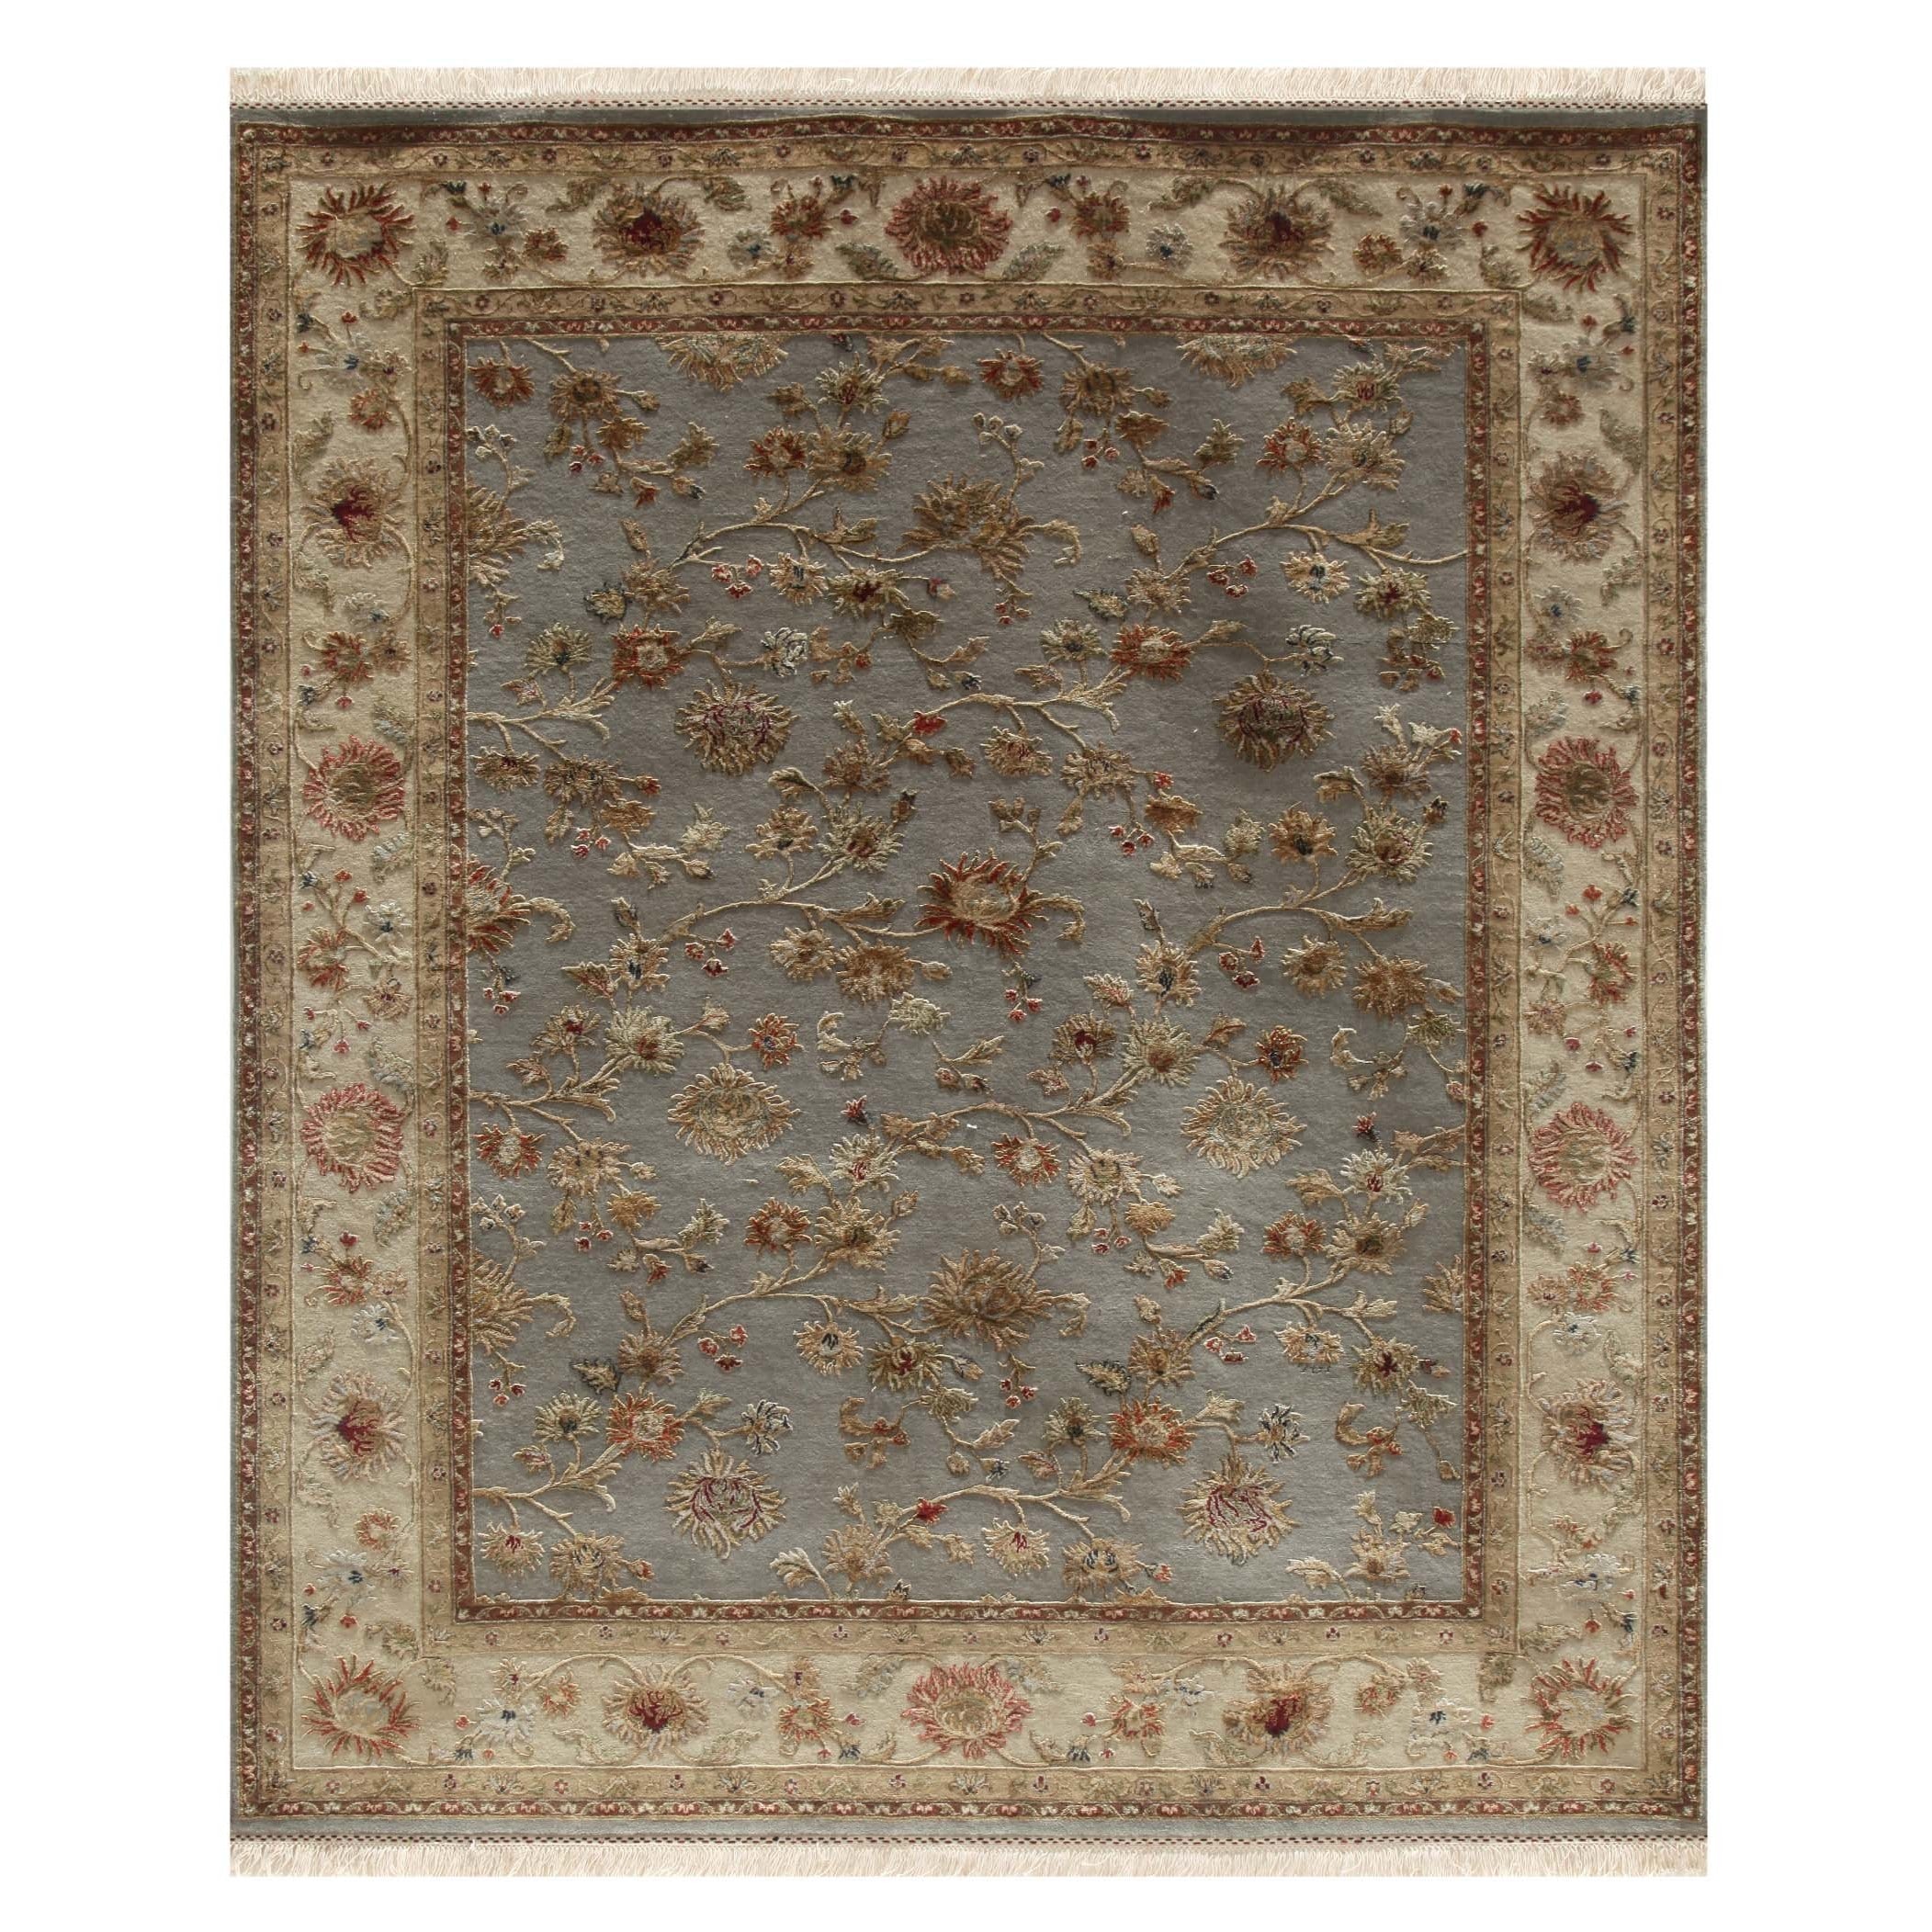 Hand knotted Blue Floral Pattern Wool/ Silk Rug (8 X 10)